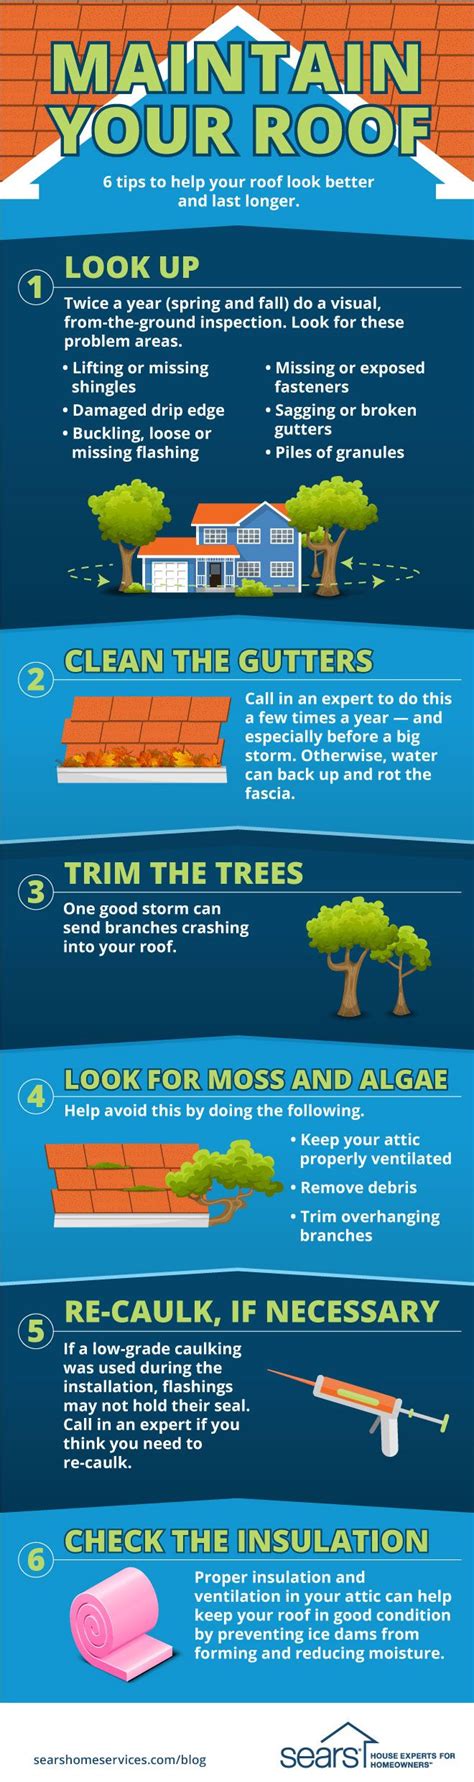 Basic roof maintenance and care can help keep your home in great shape for years to come. Keep ...